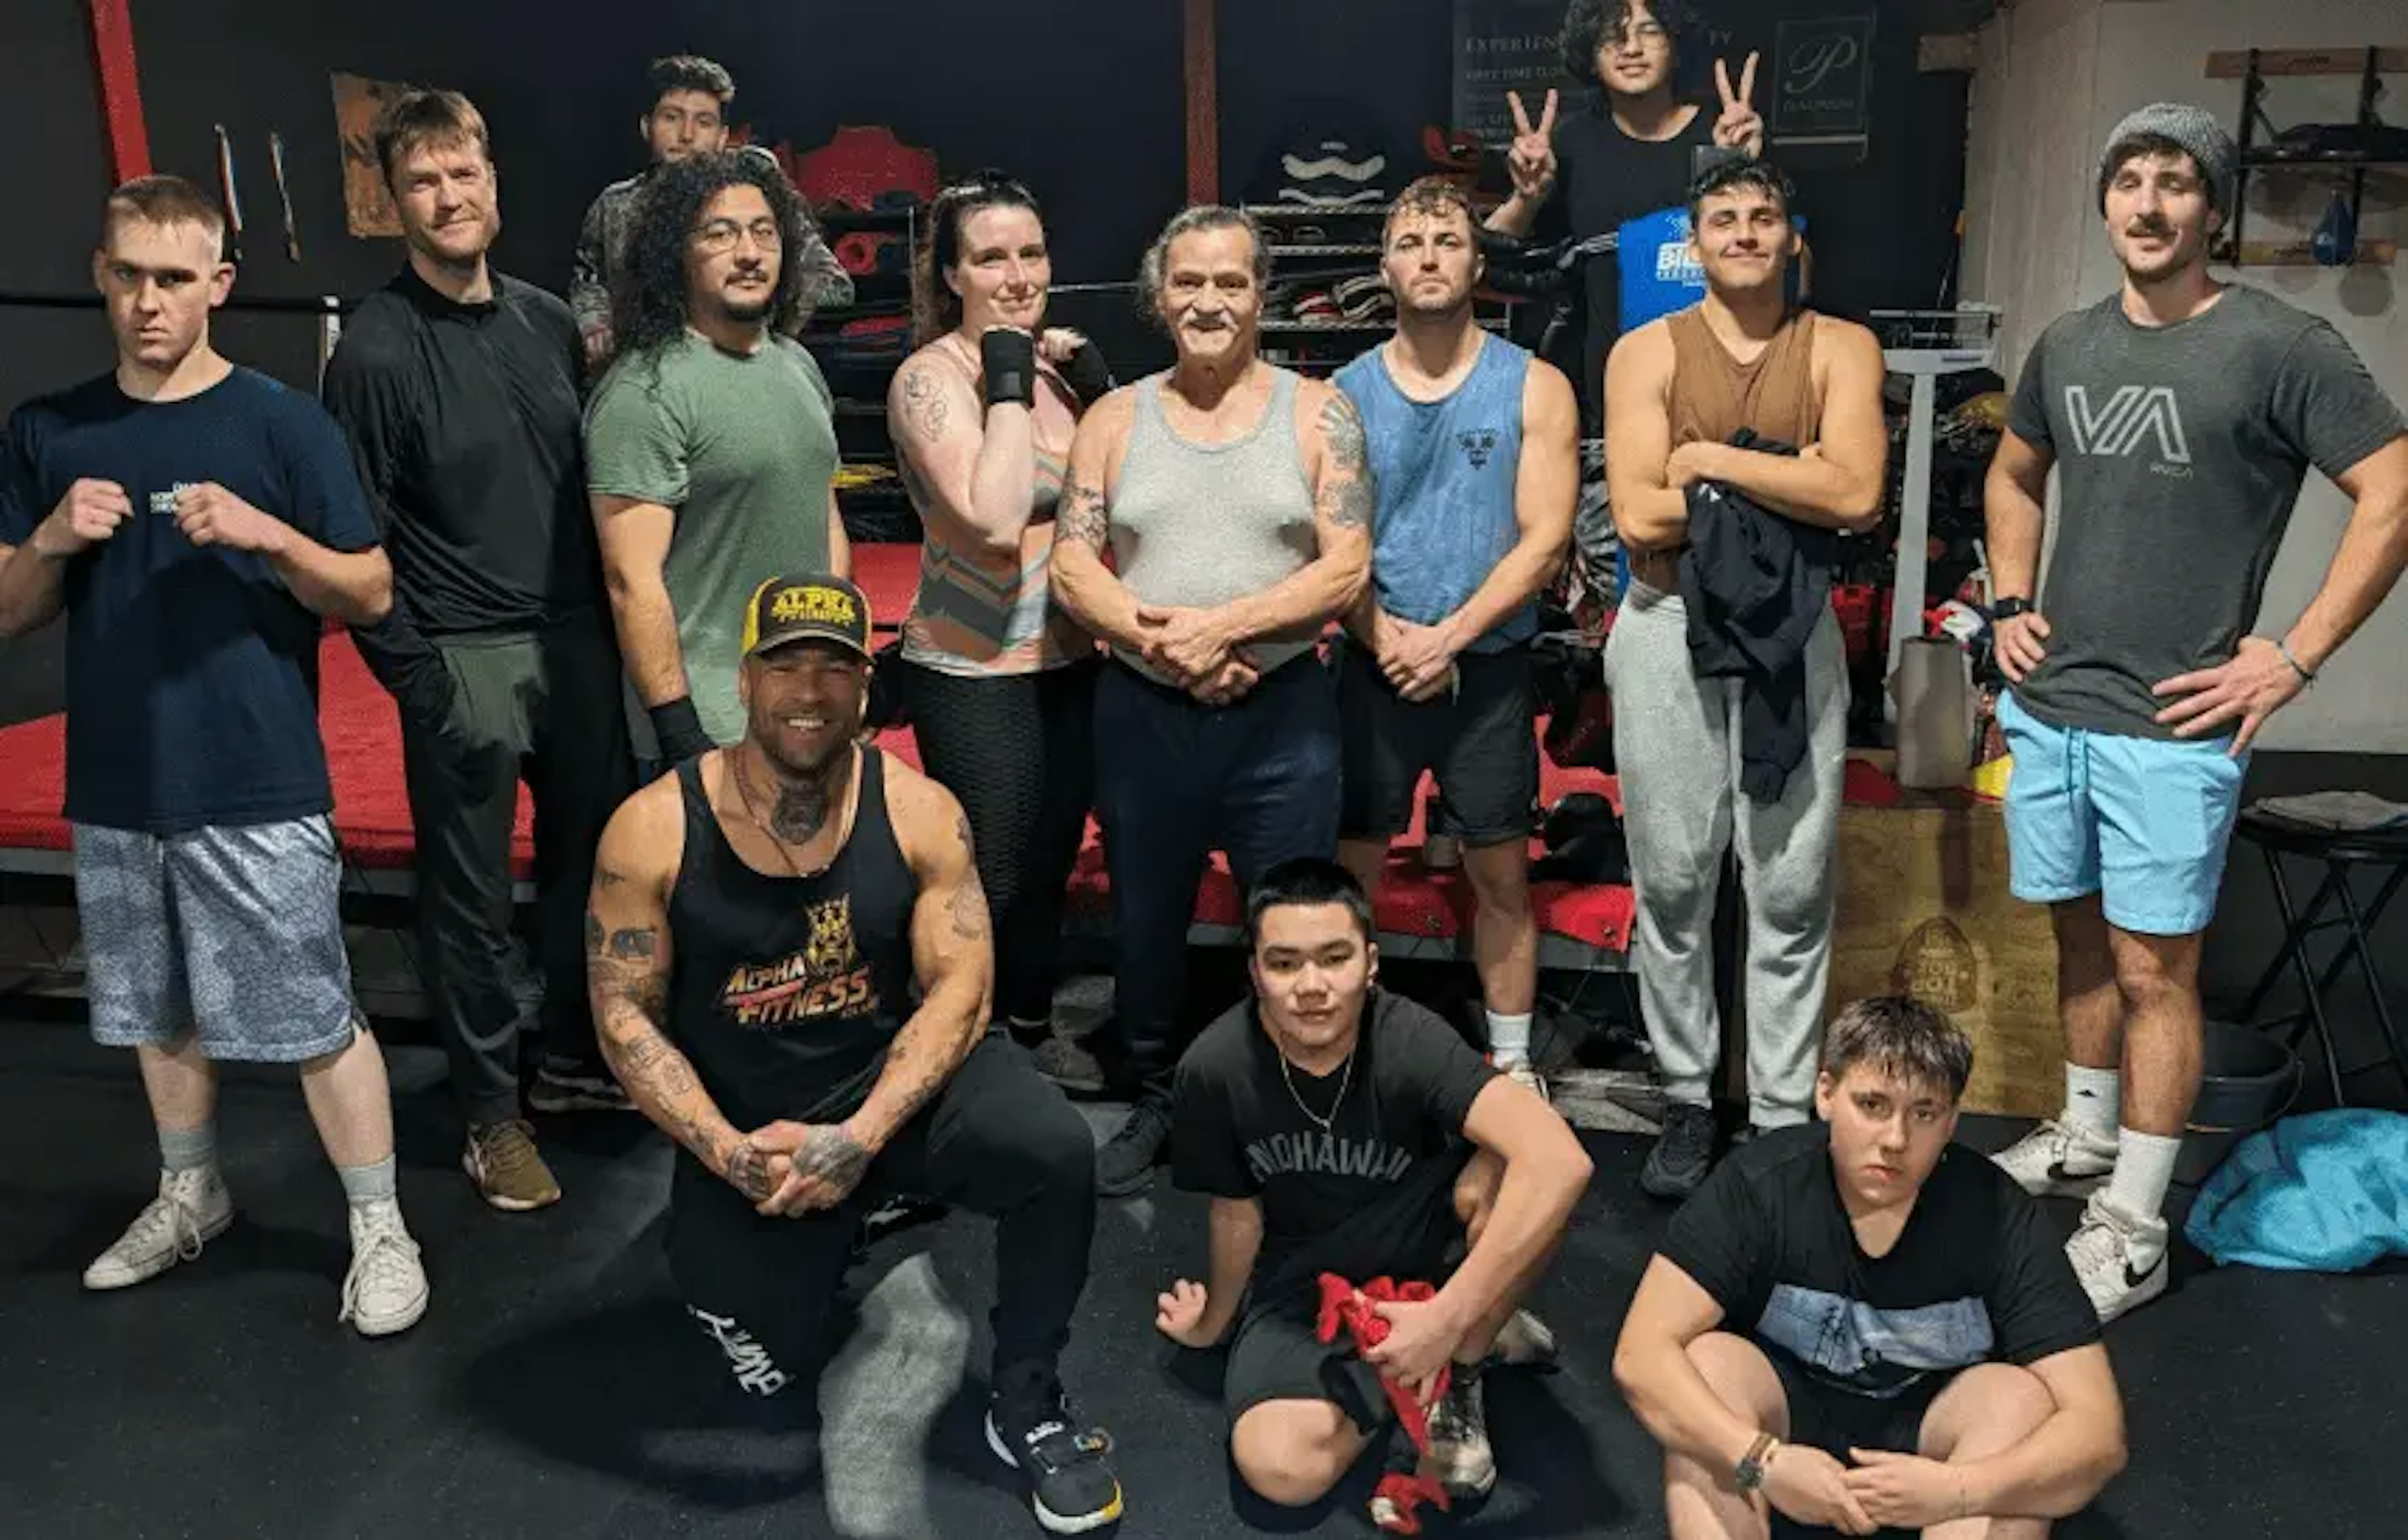 Boxing class members posing for a picture and behind them is a boxing ring.